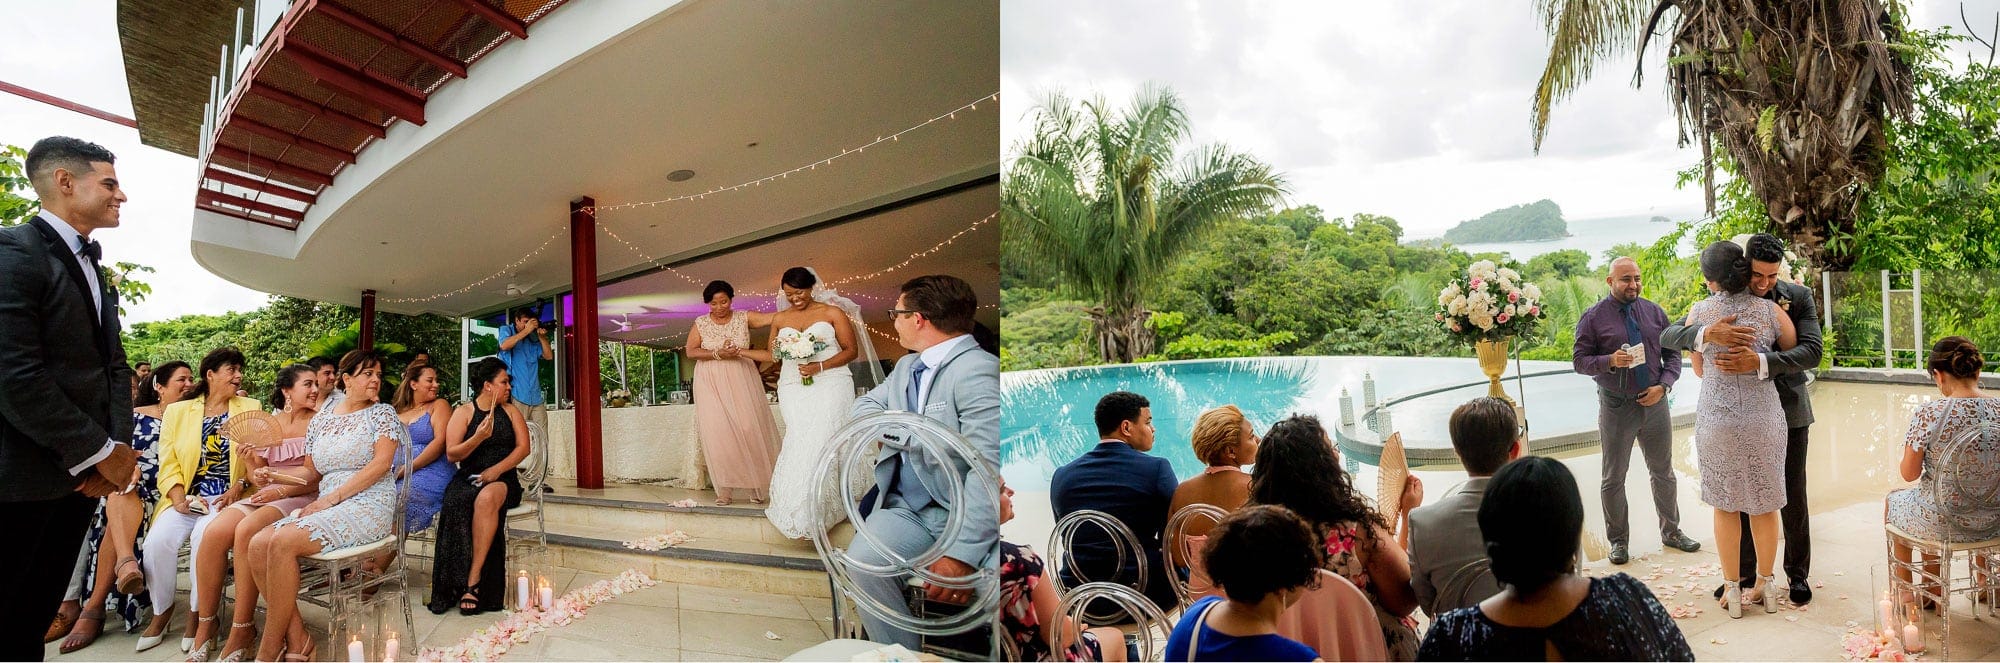 Wedding venue ideas: clear seating in front a pool with a breathtaking view